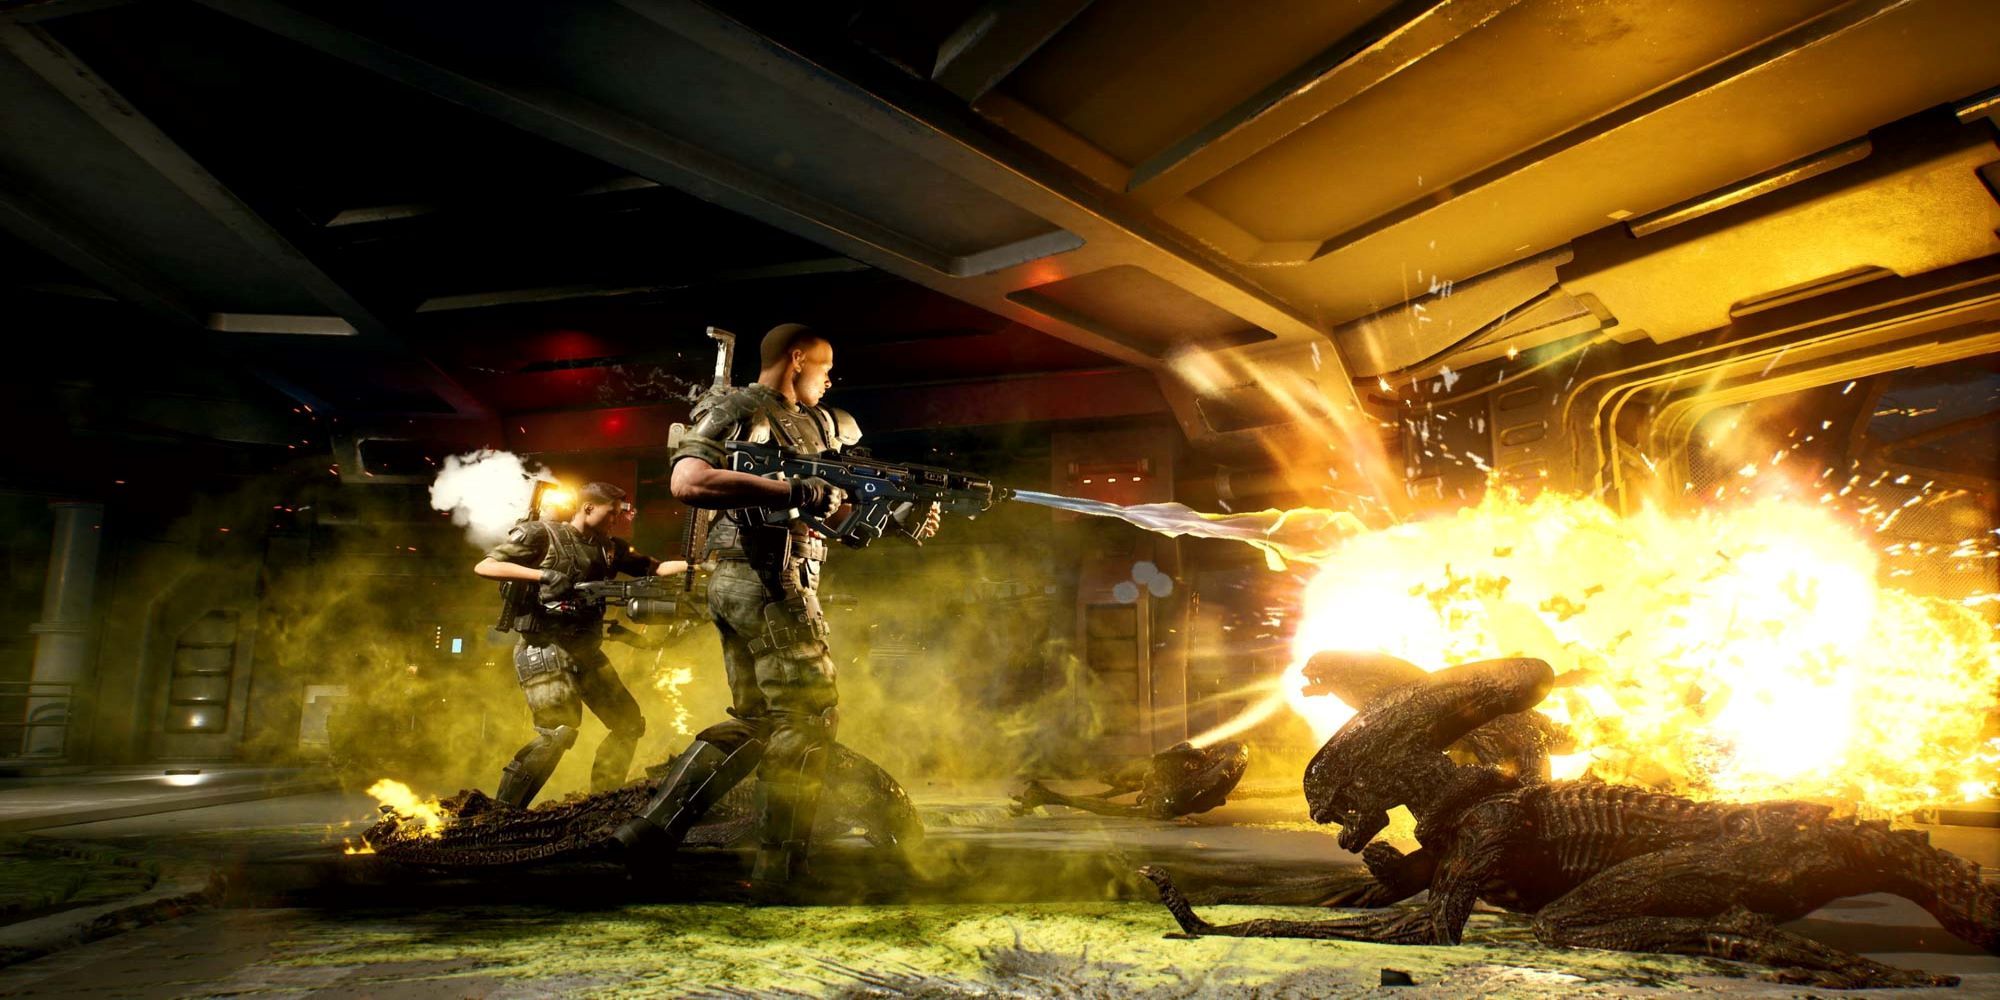 A Demolisher clears the room with a flamethrower in Aliens: Fireteam Elite